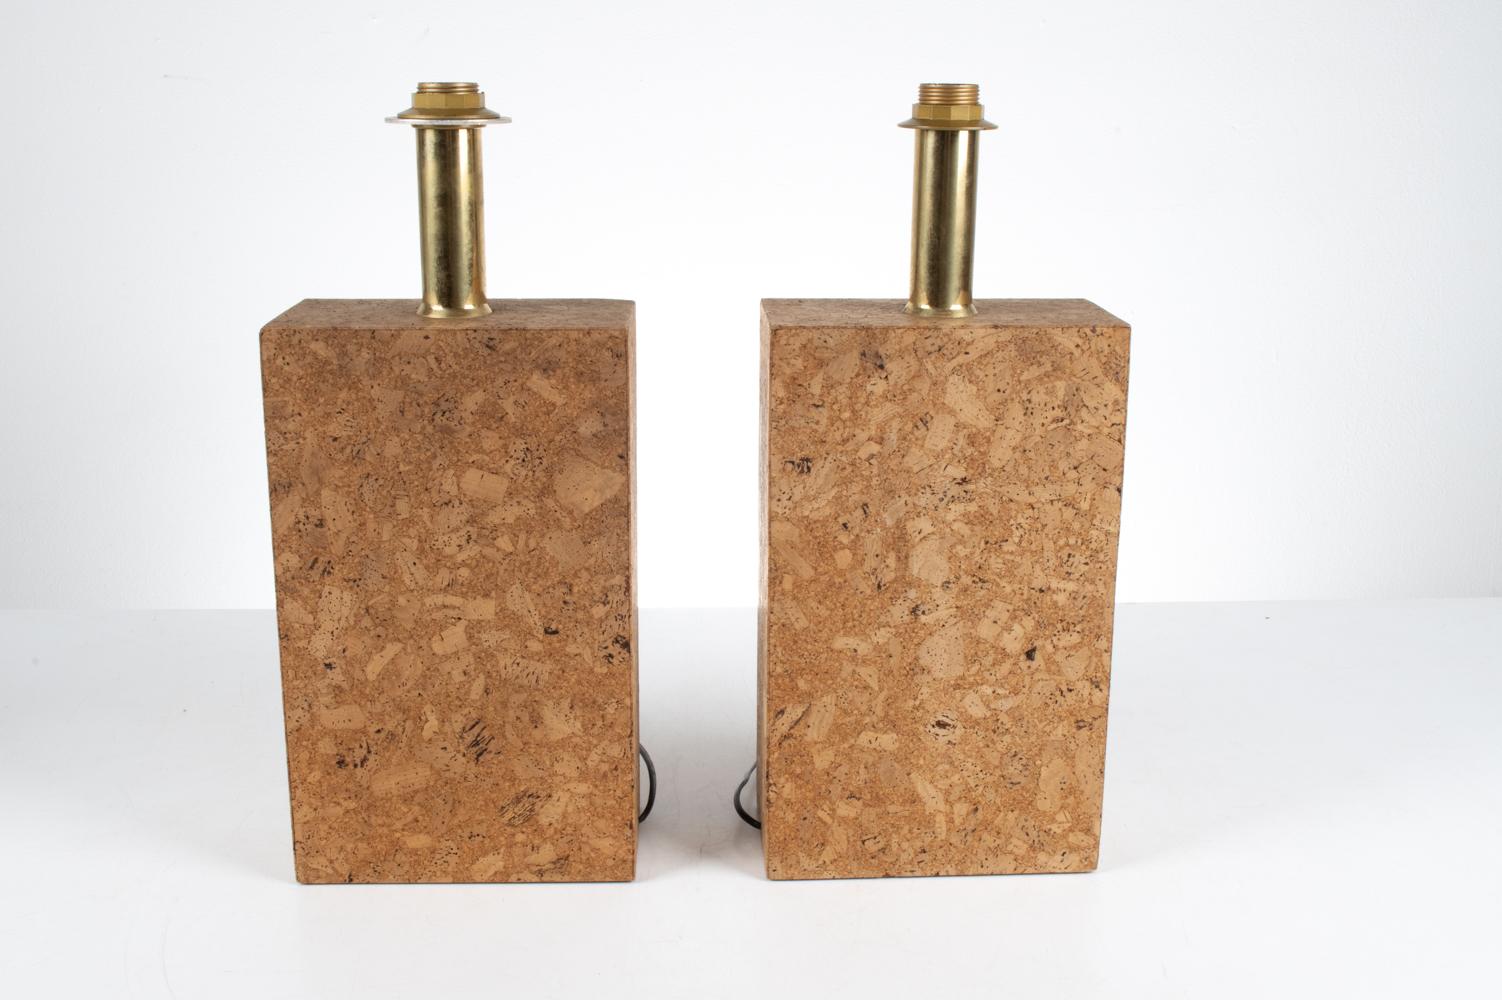 Pair of Cork Monolith Table Lamps in the Stye of Ingo Maurer, c. 1970's For Sale 5